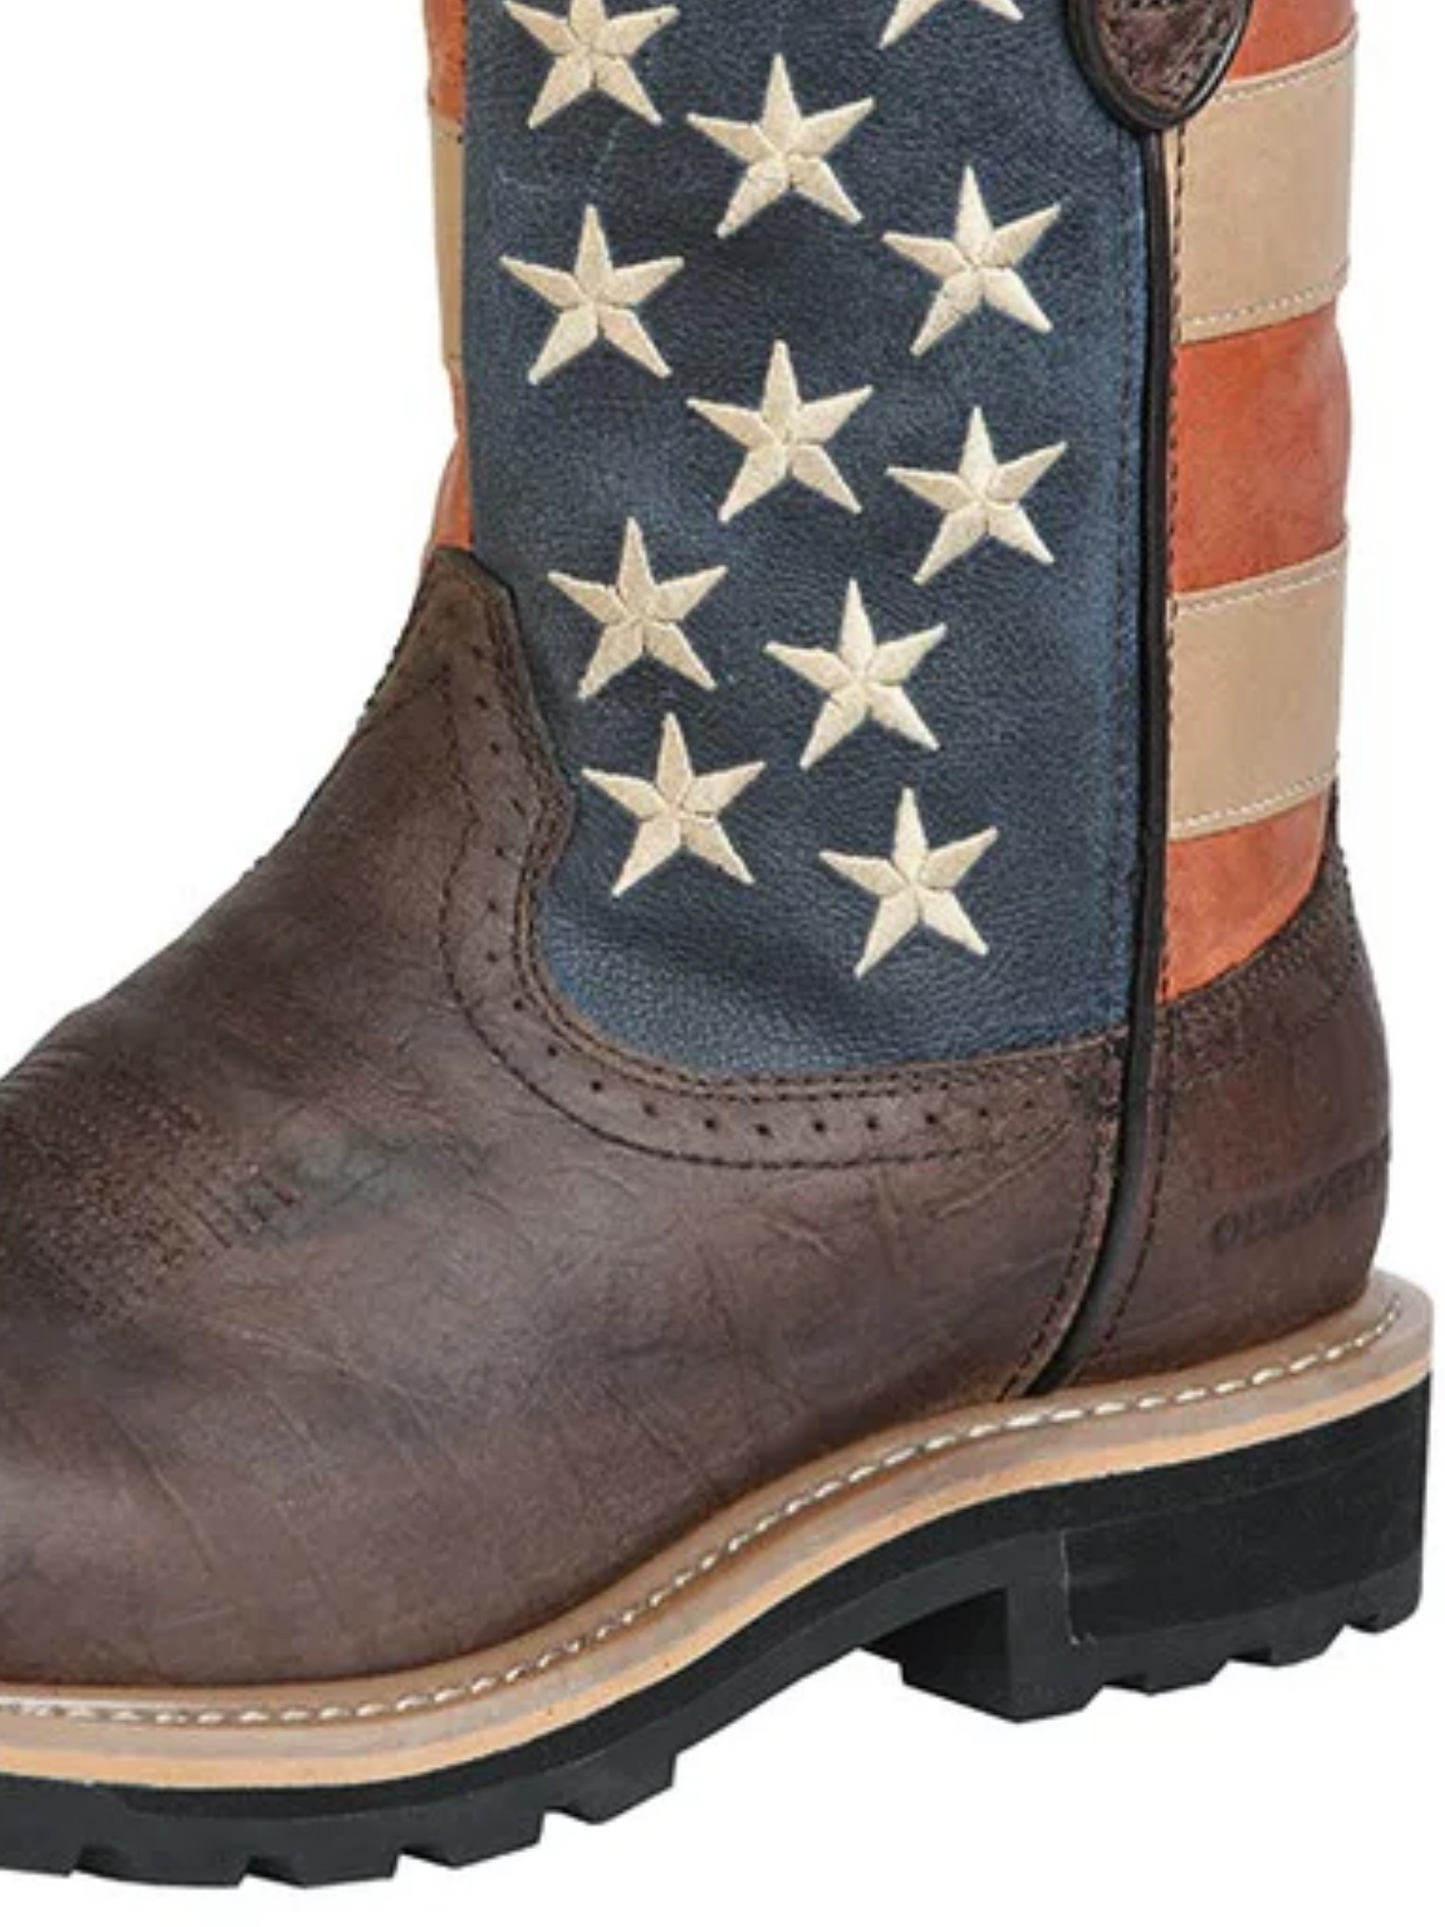 Goodyear Waterproof Construction Work Boots USA Flag with Genuine Leather Soft Toe for Men 'Centenario' - ID: 126722 Waterproof Work Boots Centenario